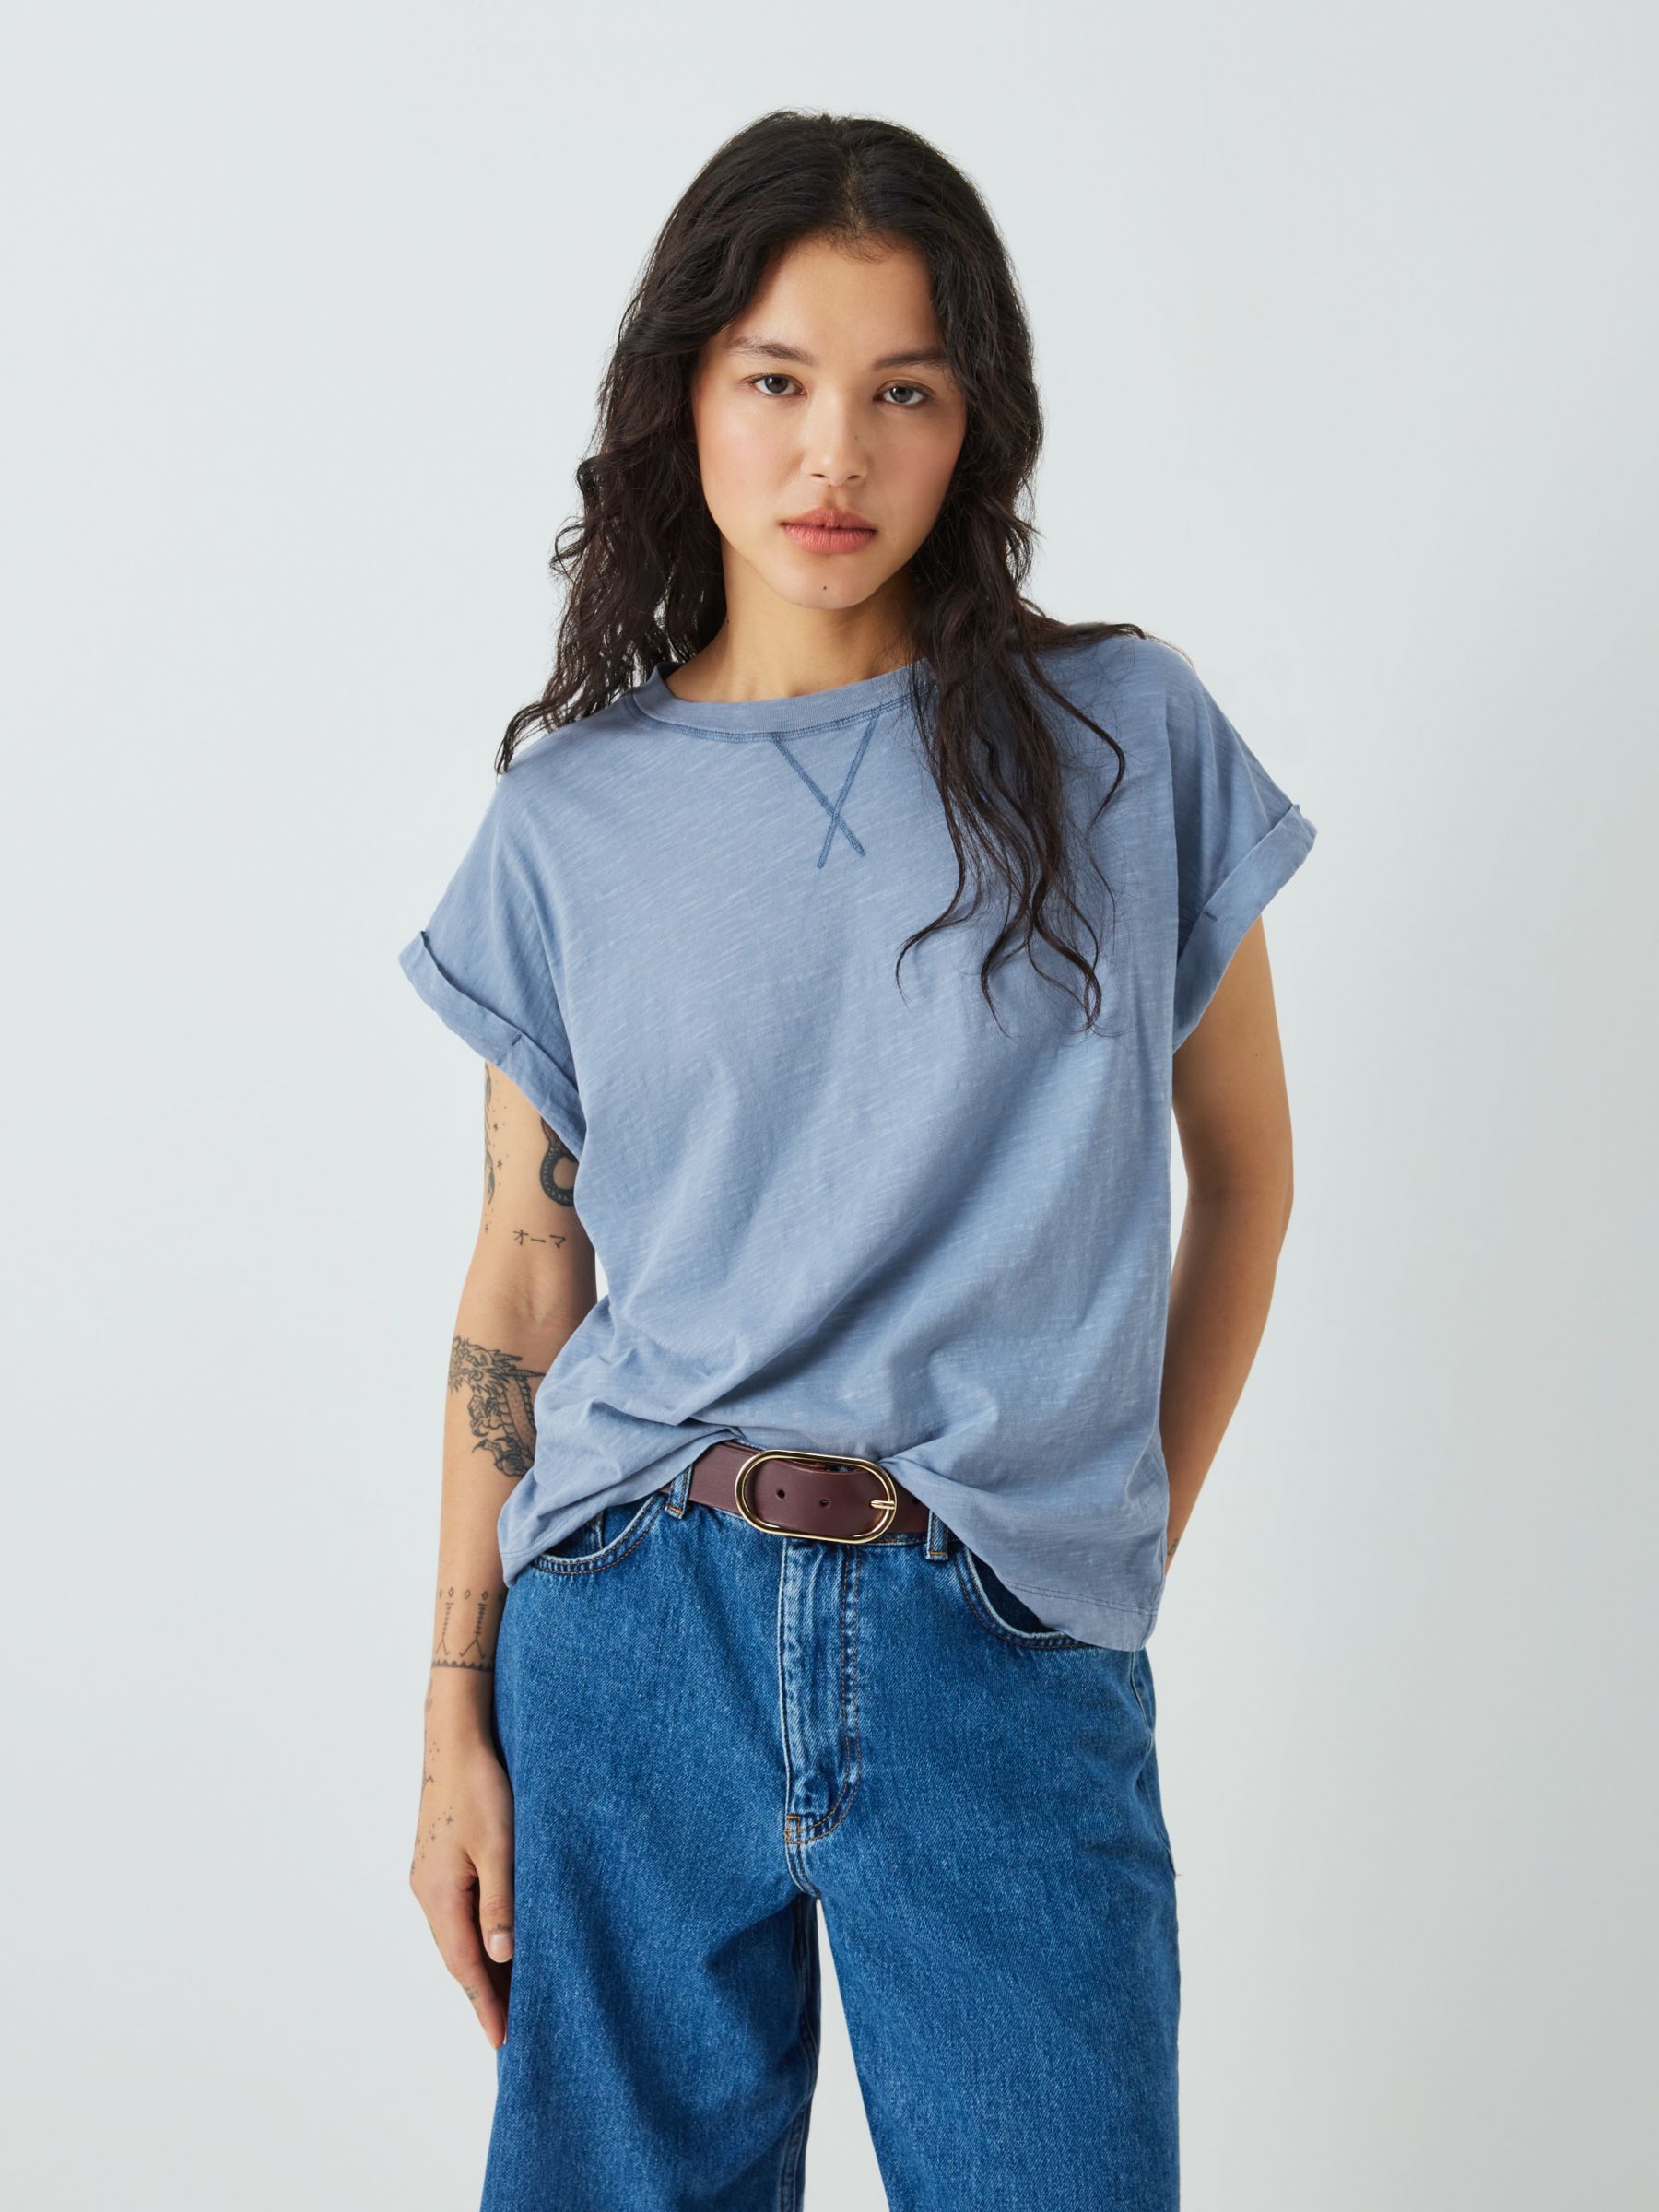 AND/OR Garment Dyed Stitch Tank T-Shirt, Soft Blue at John Lewis & Partners